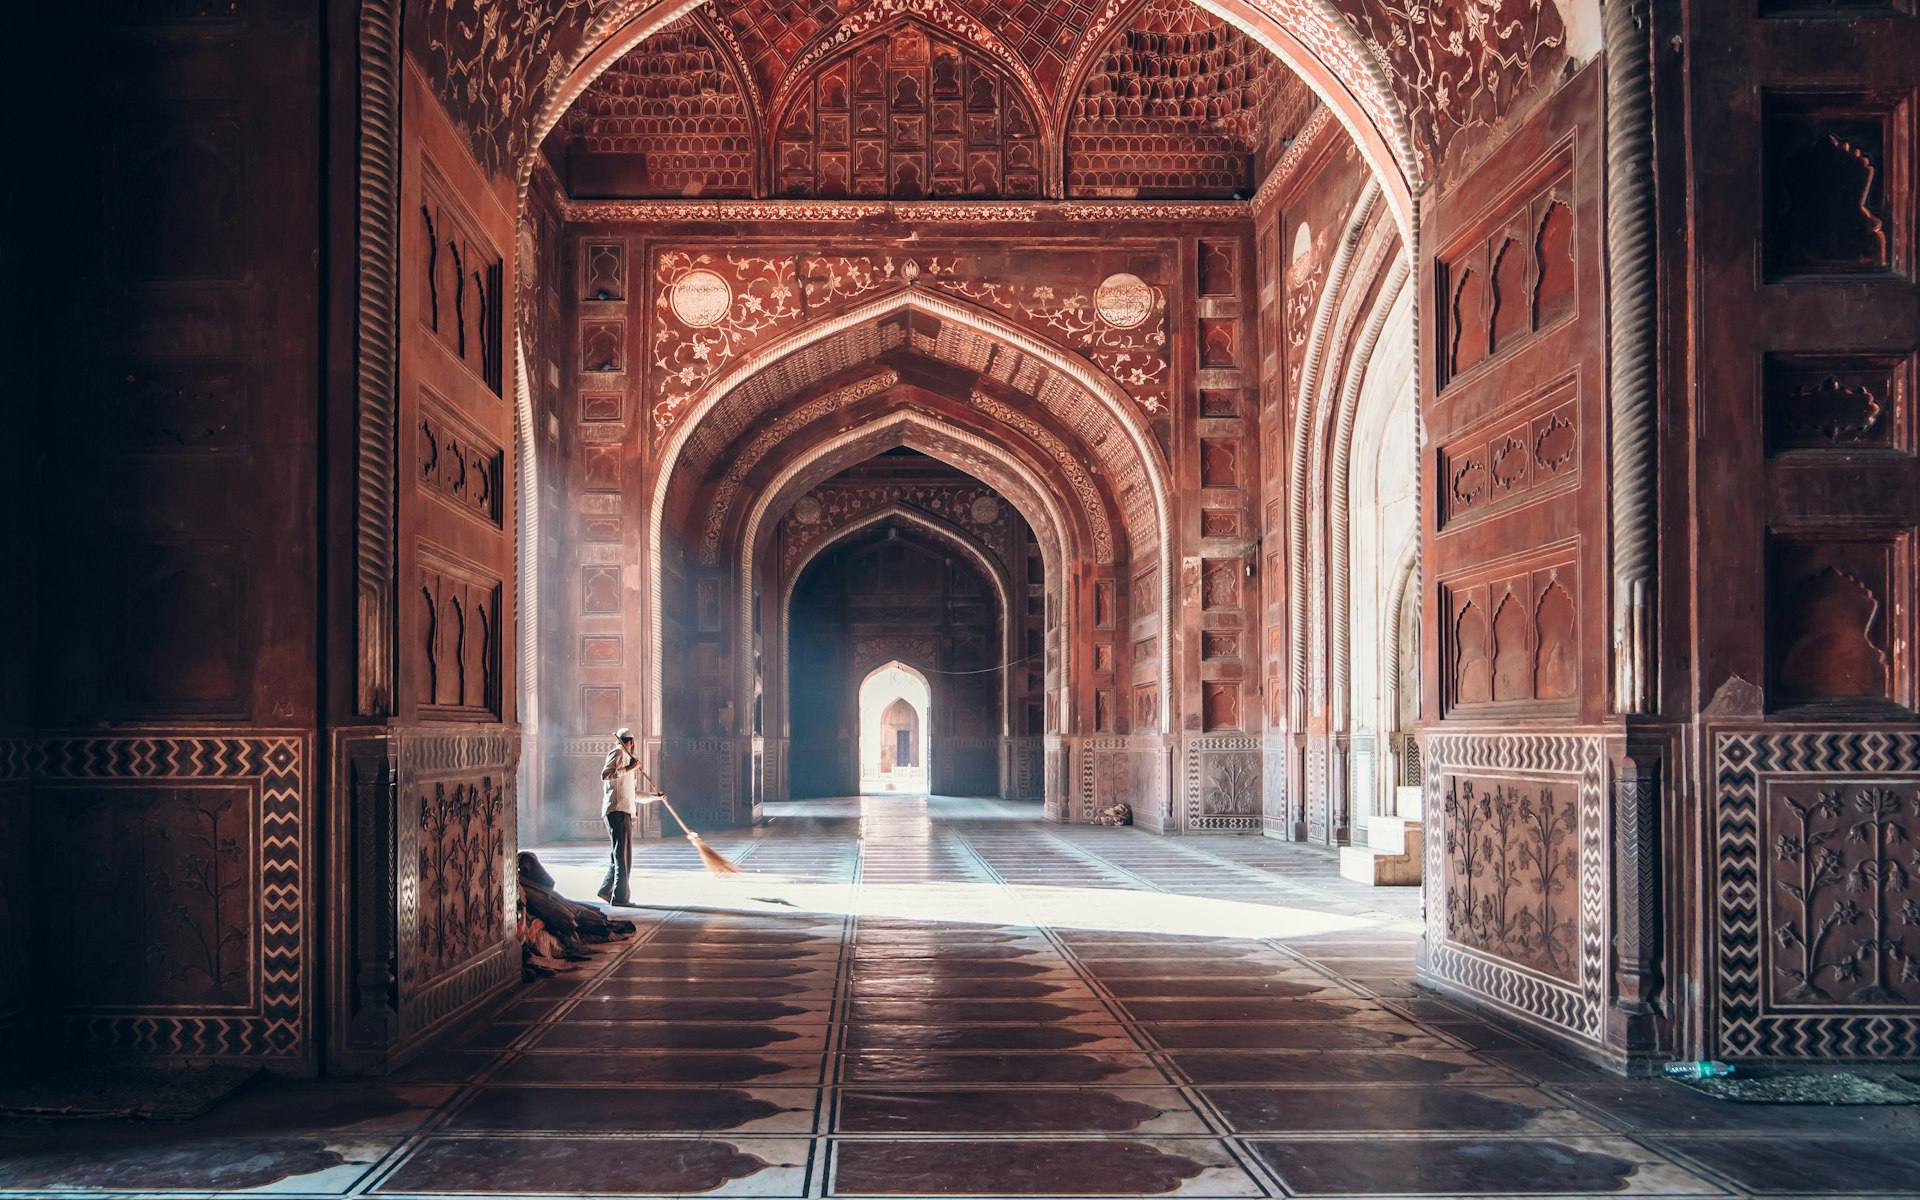 A man sweeps the floor inside the Taj Mahal mausoleum, the light streaming in behind him.